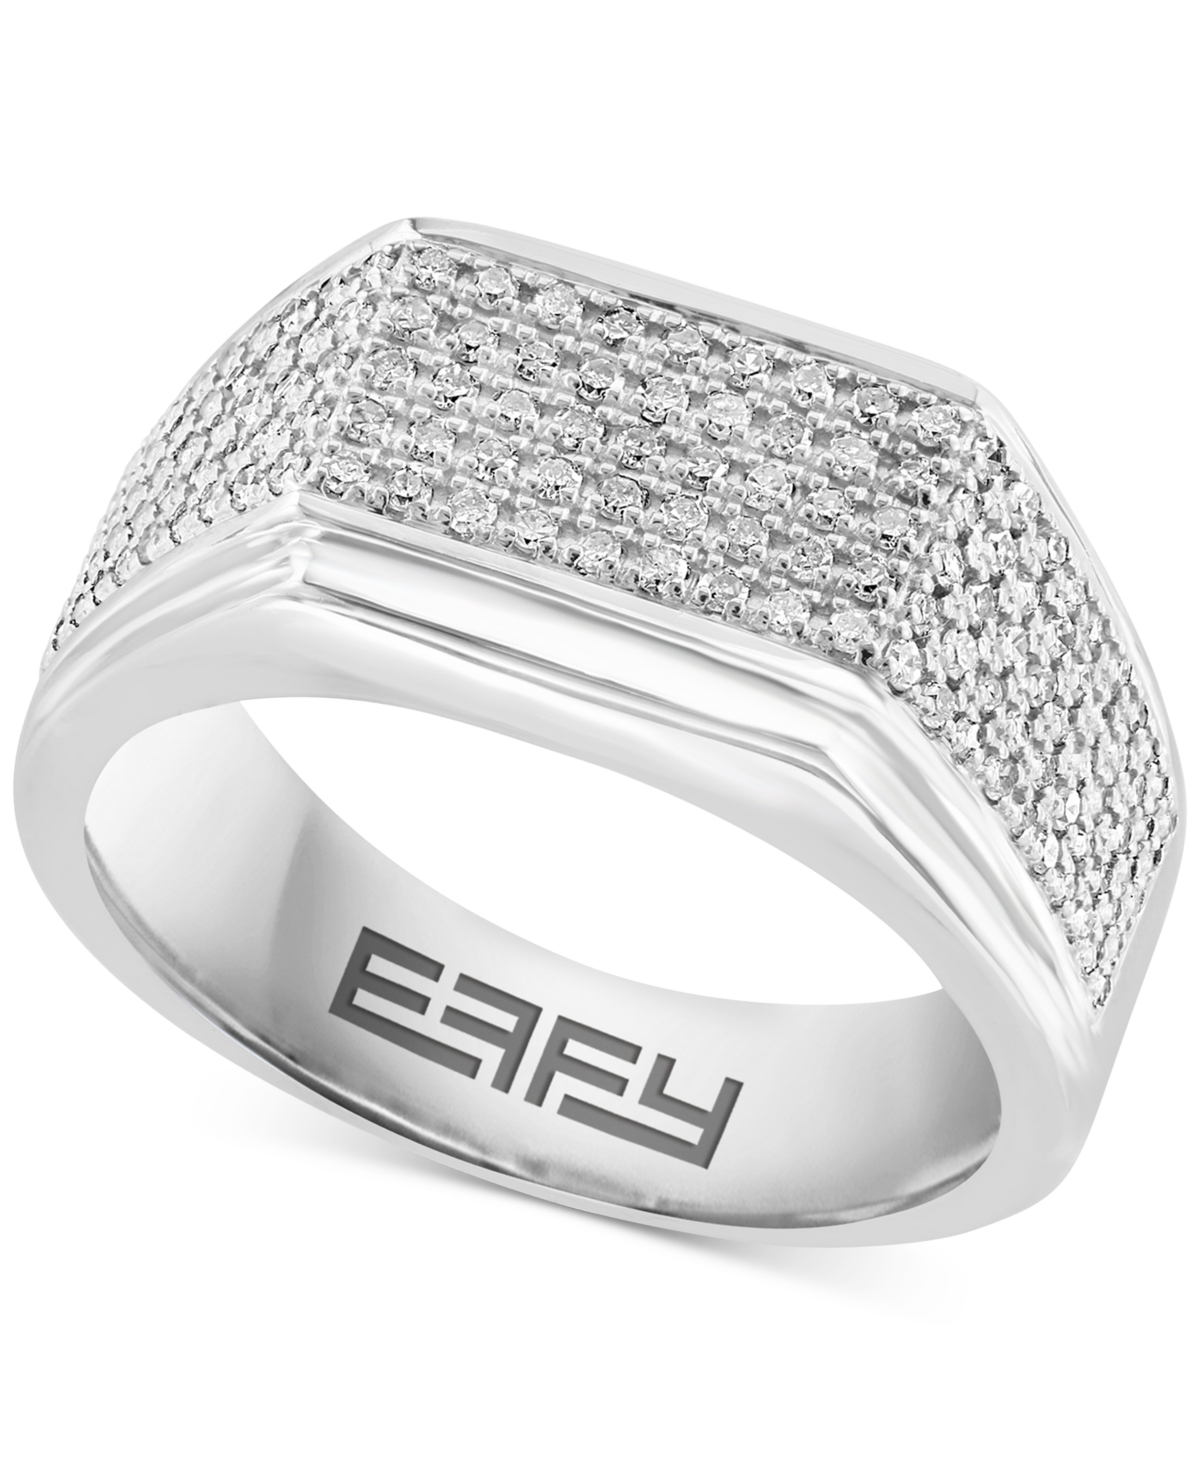 Effy Collection Effy Men's Diamond Pave Cluster Ring (5/8 ct. t.w.) in Sterling Silver